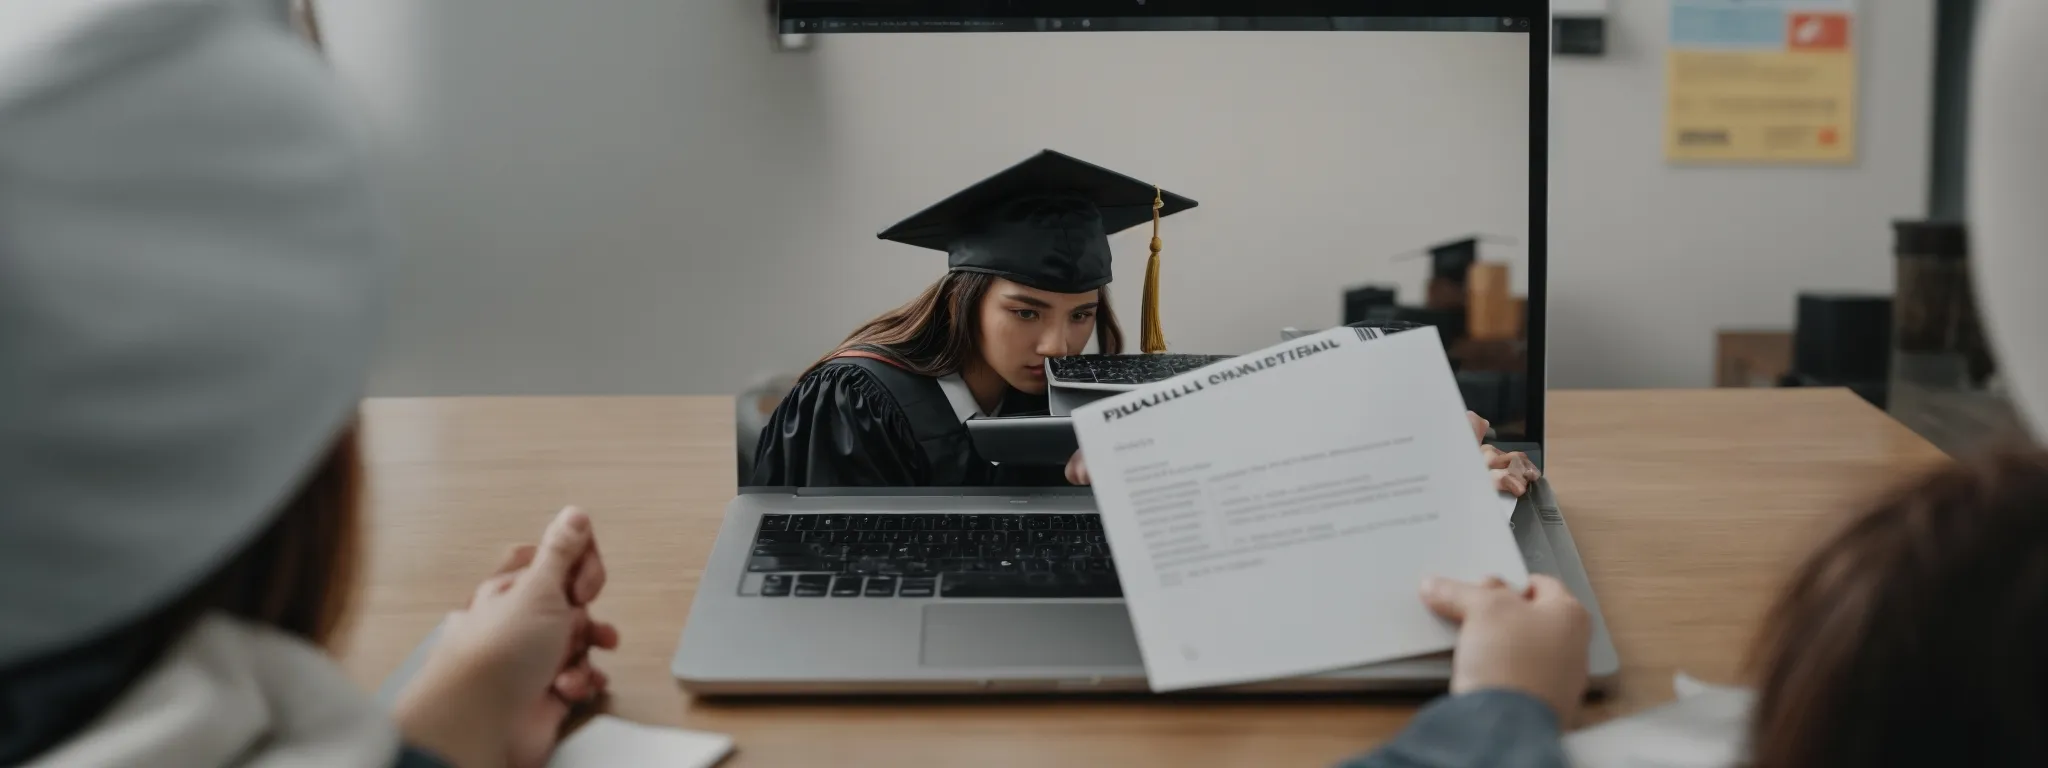 a person in a graduation cap and gown proudly holding a diploma, with a laptop displaying a search engine on screen in the background.